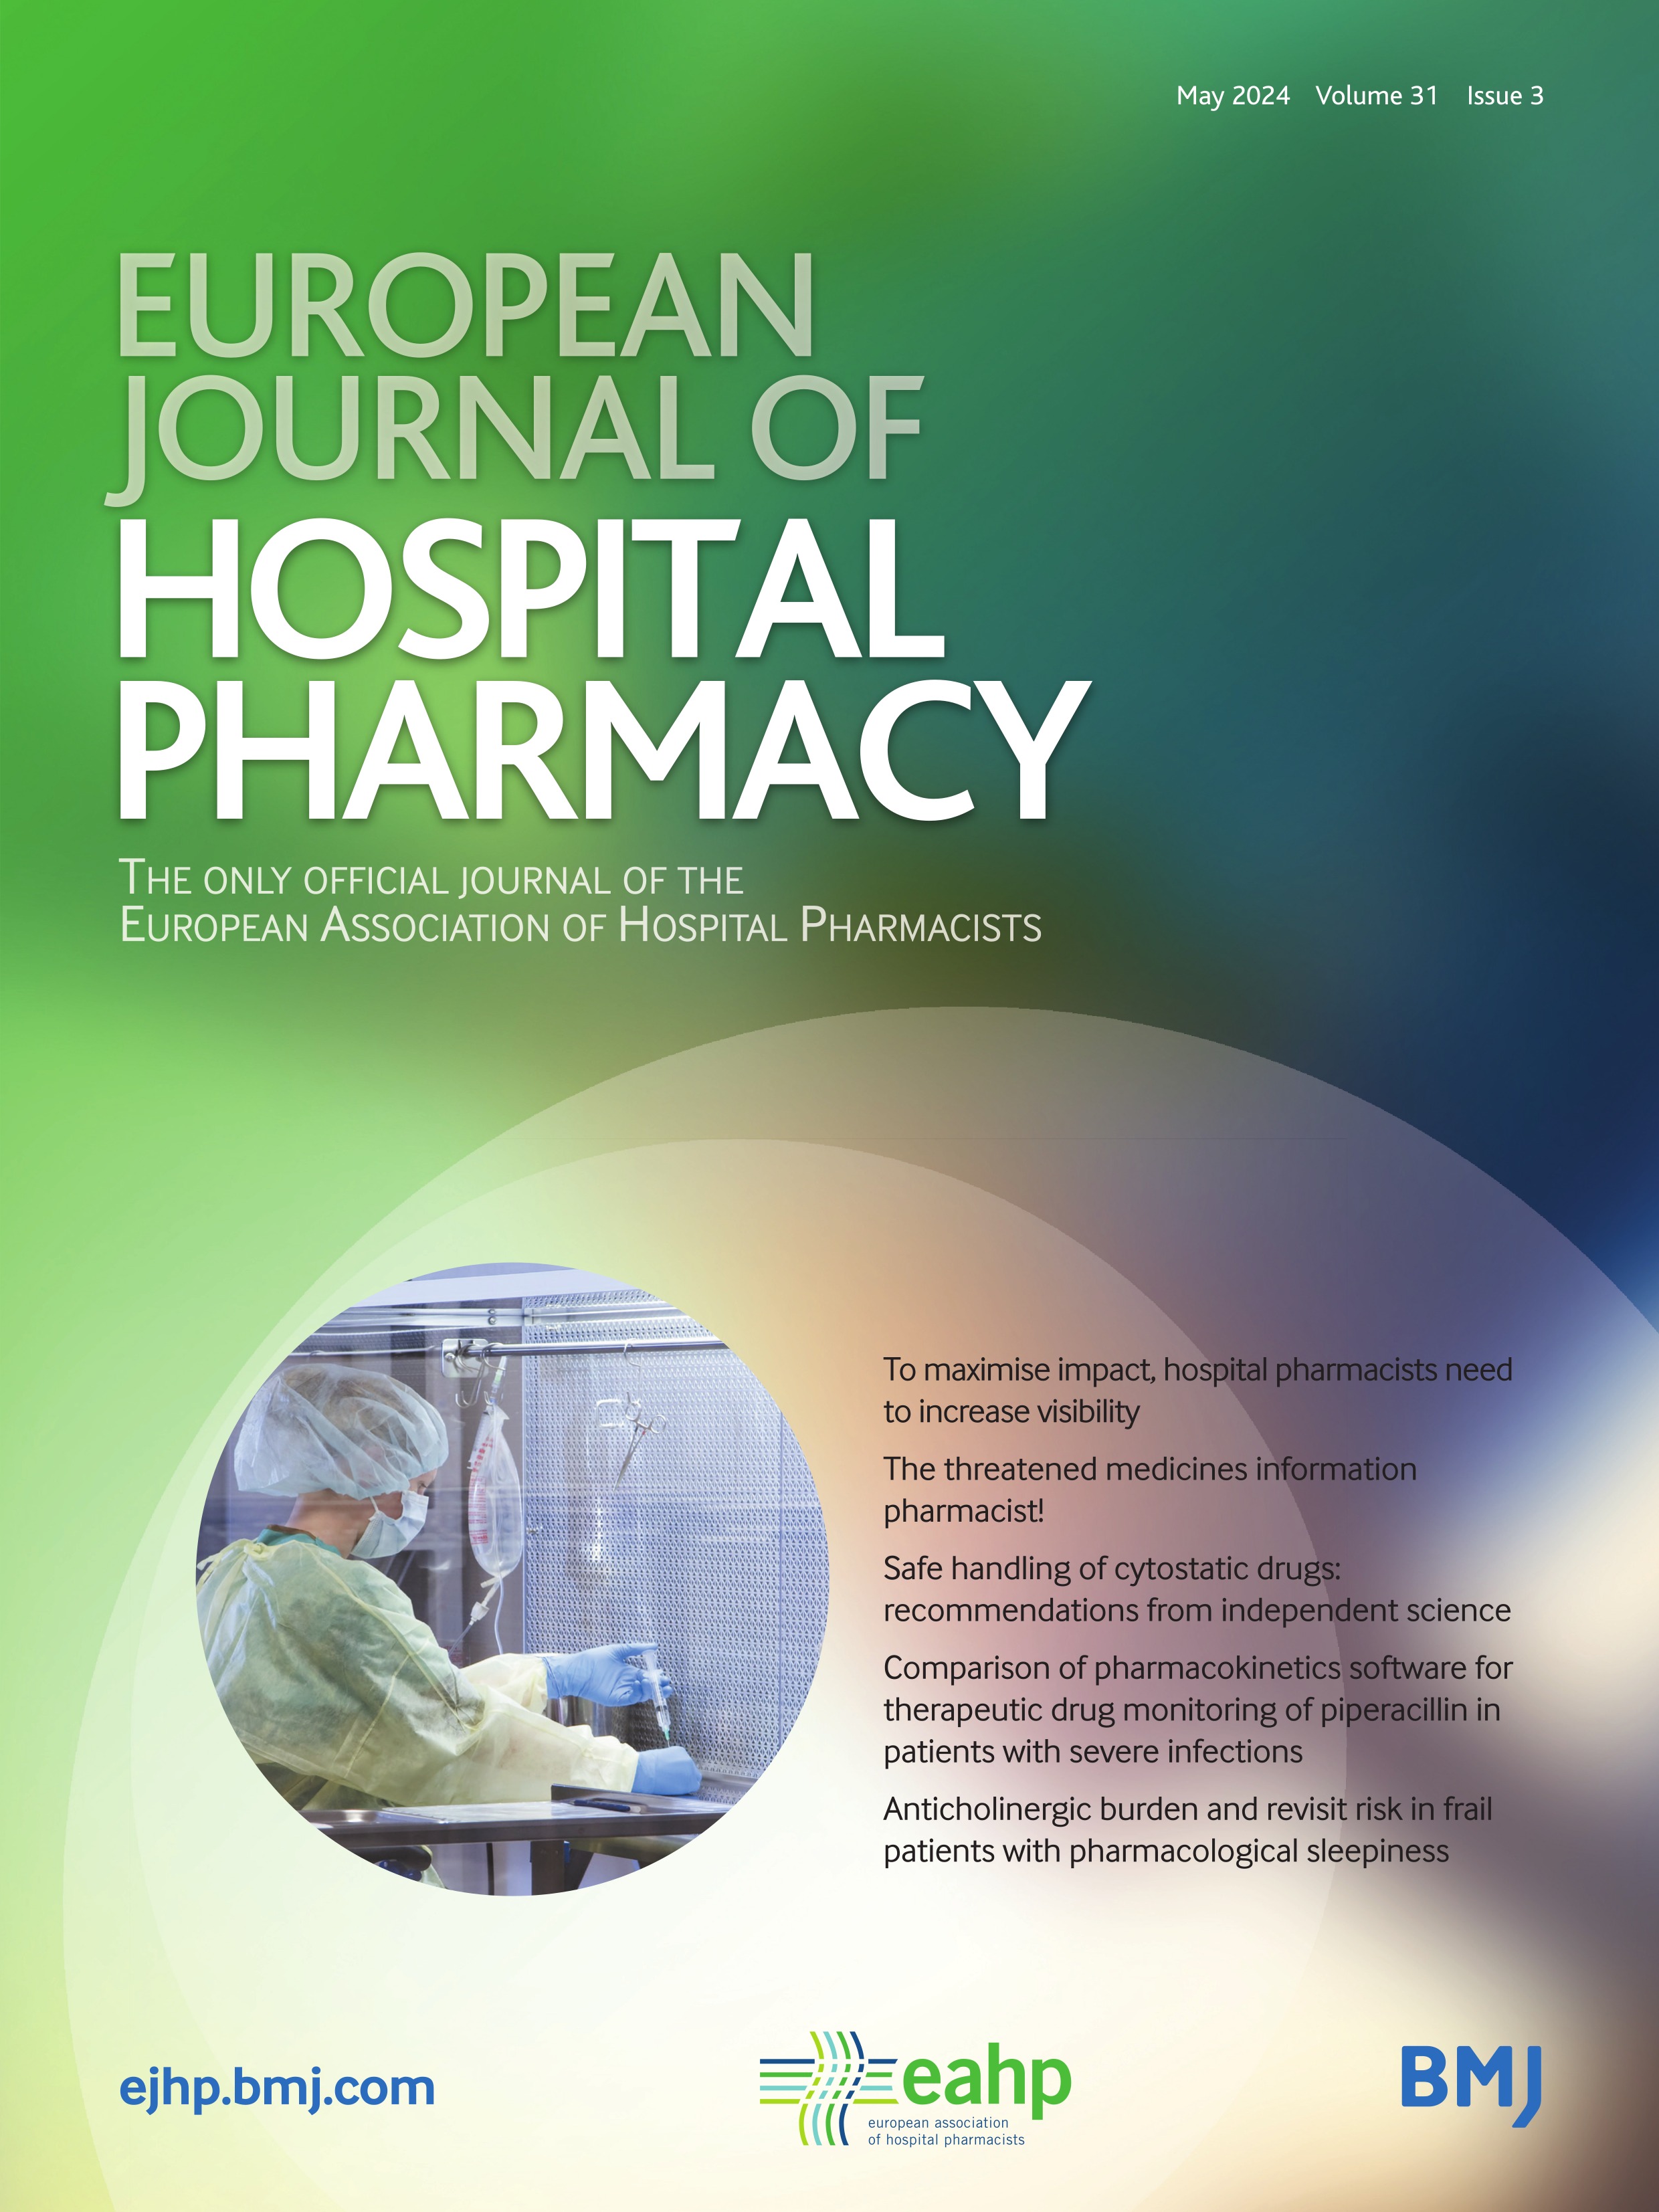 Comparison of pharmacokinetics software for therapeutic drug monitoring of piperacillin in patients with severe infections